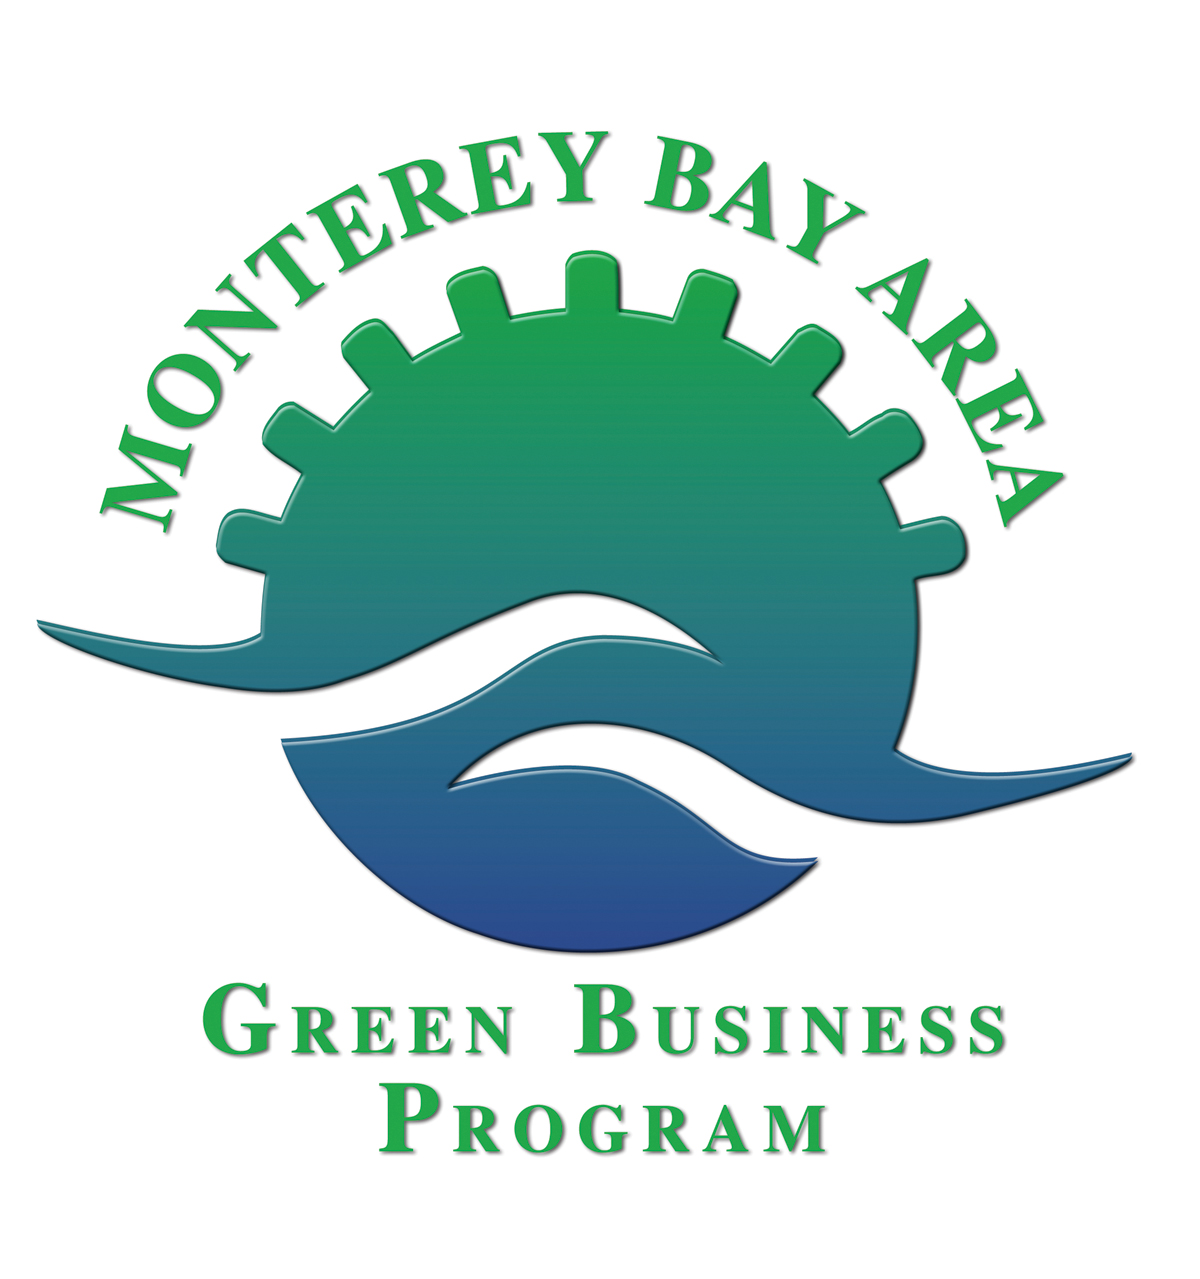 MB Area Green Business